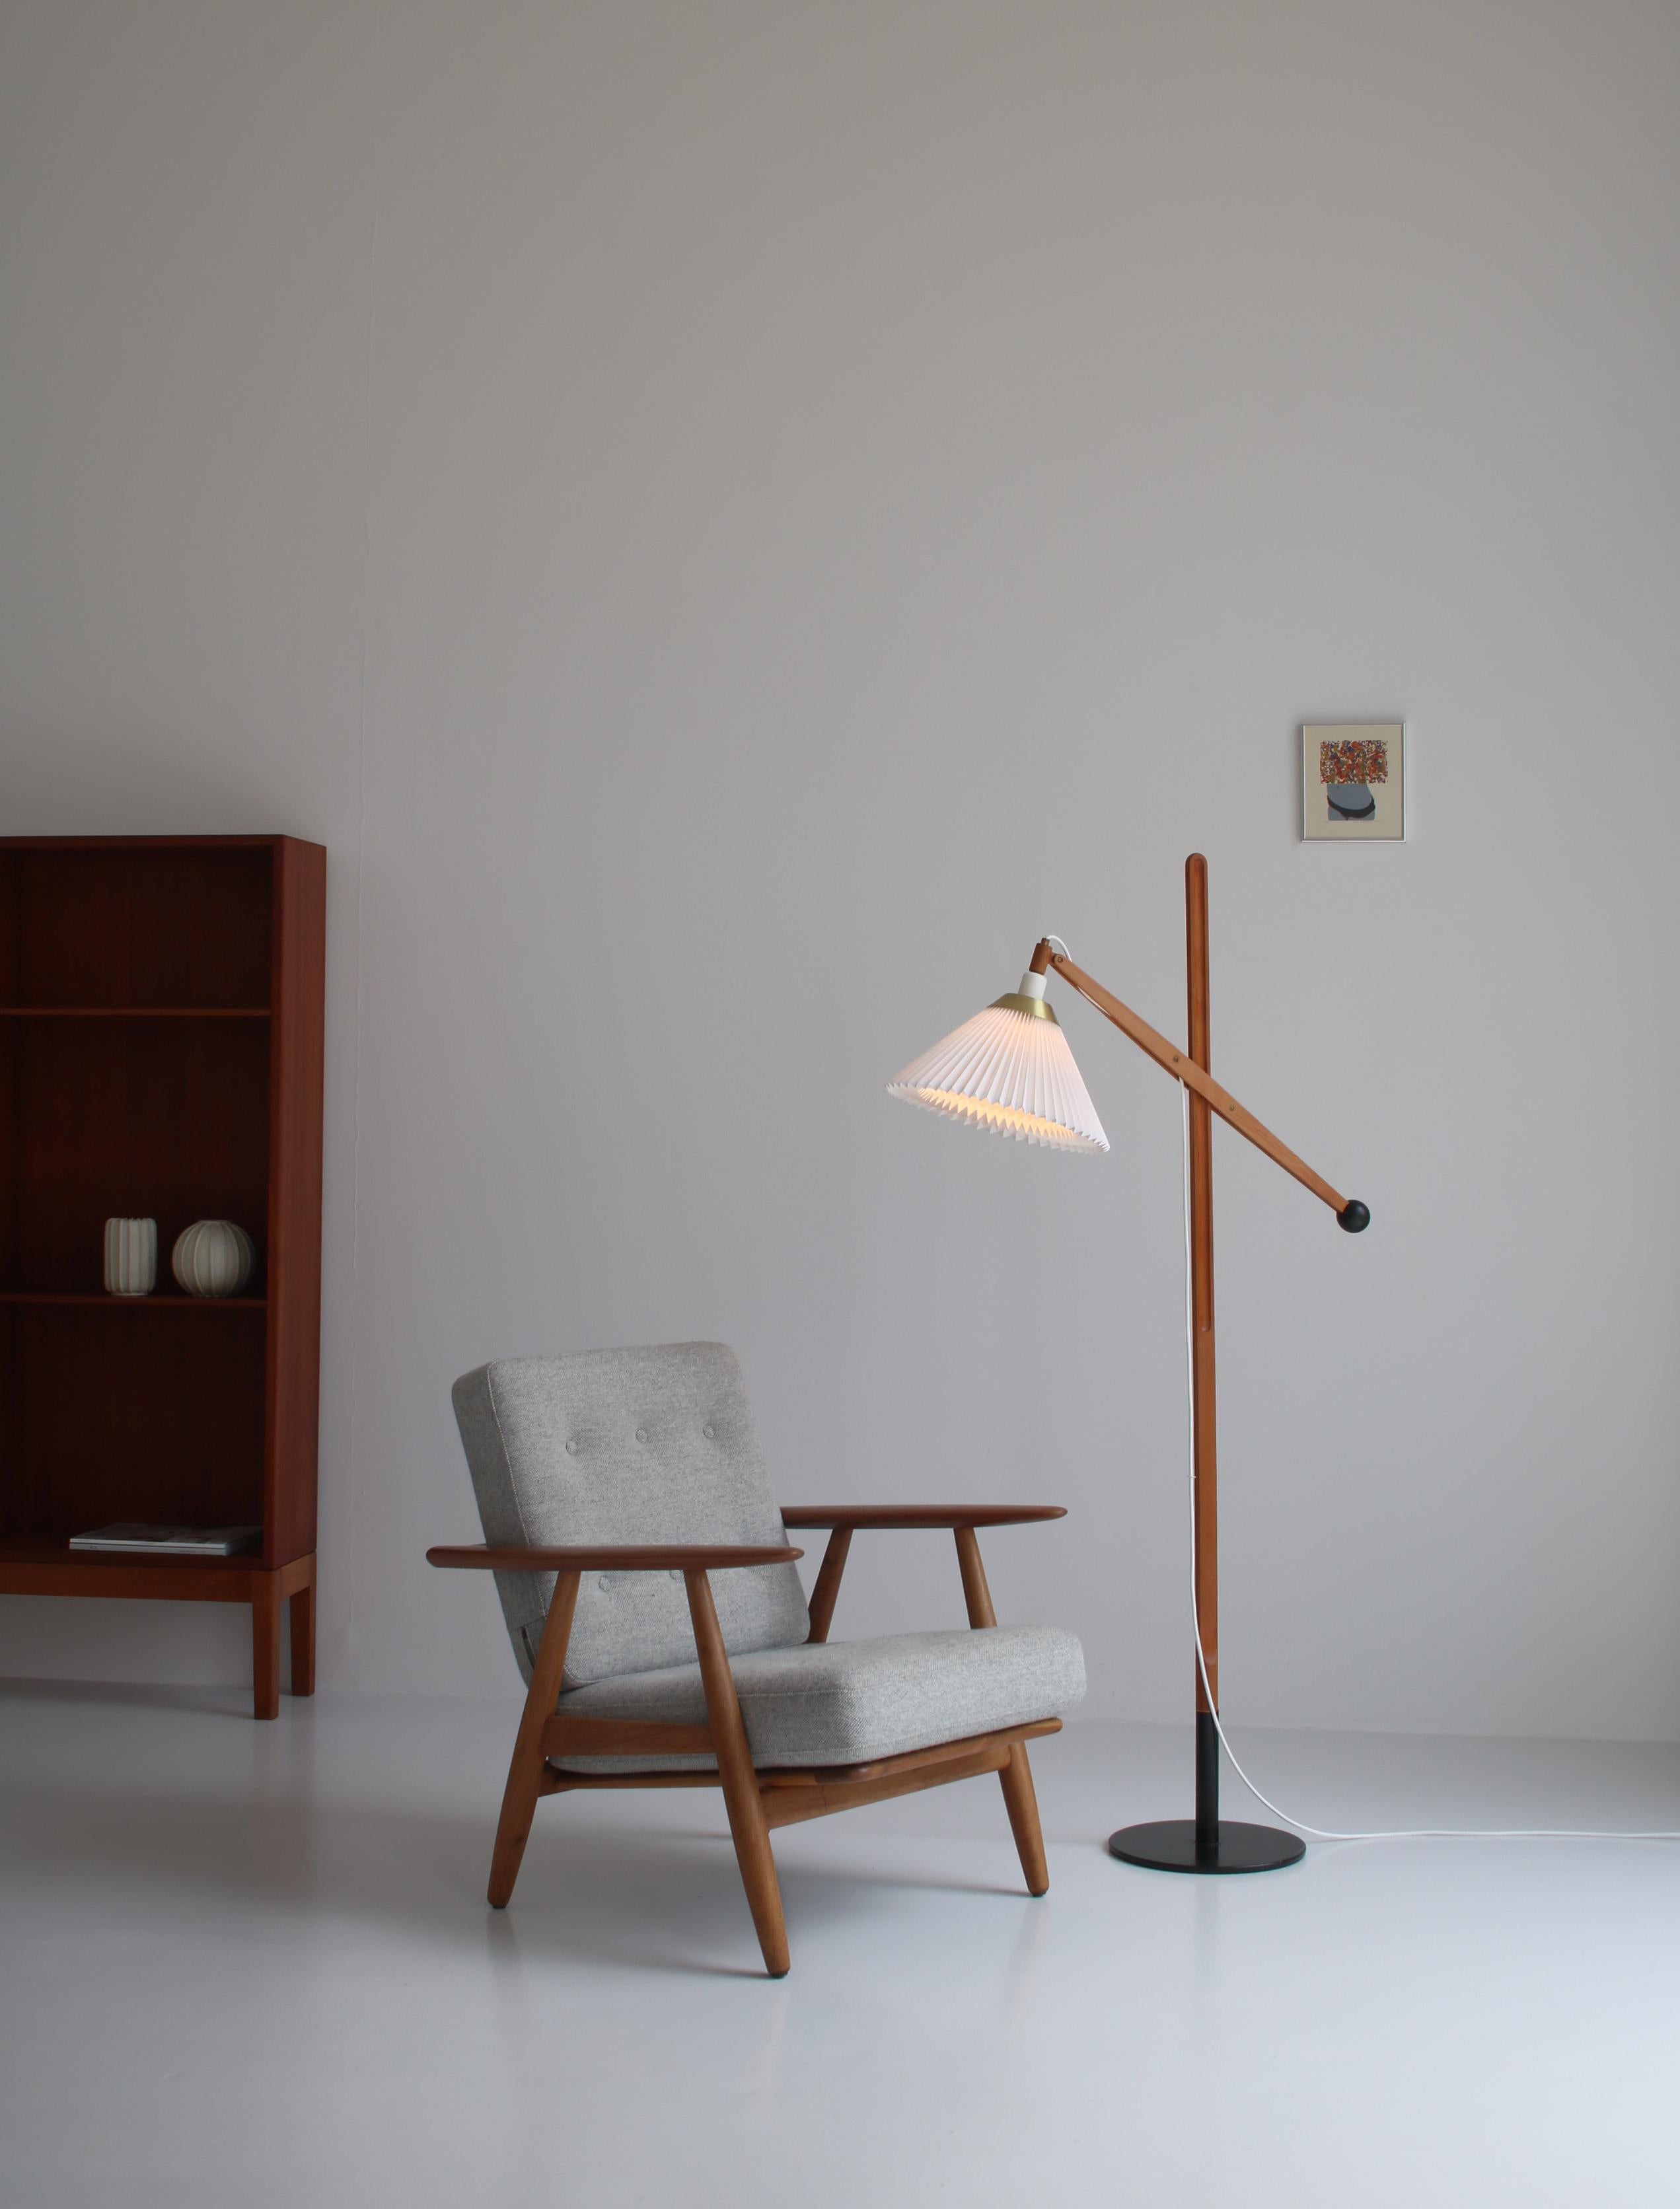 Danish Modern floor lamp by architect Vilhelm Wohlert designed in 1957 and manufactured at Le Klint, Denmark. The lamp is an early model made from solid Oregon Pine with an amazing grain structure. Adjustable in all directions. Beautiful brass